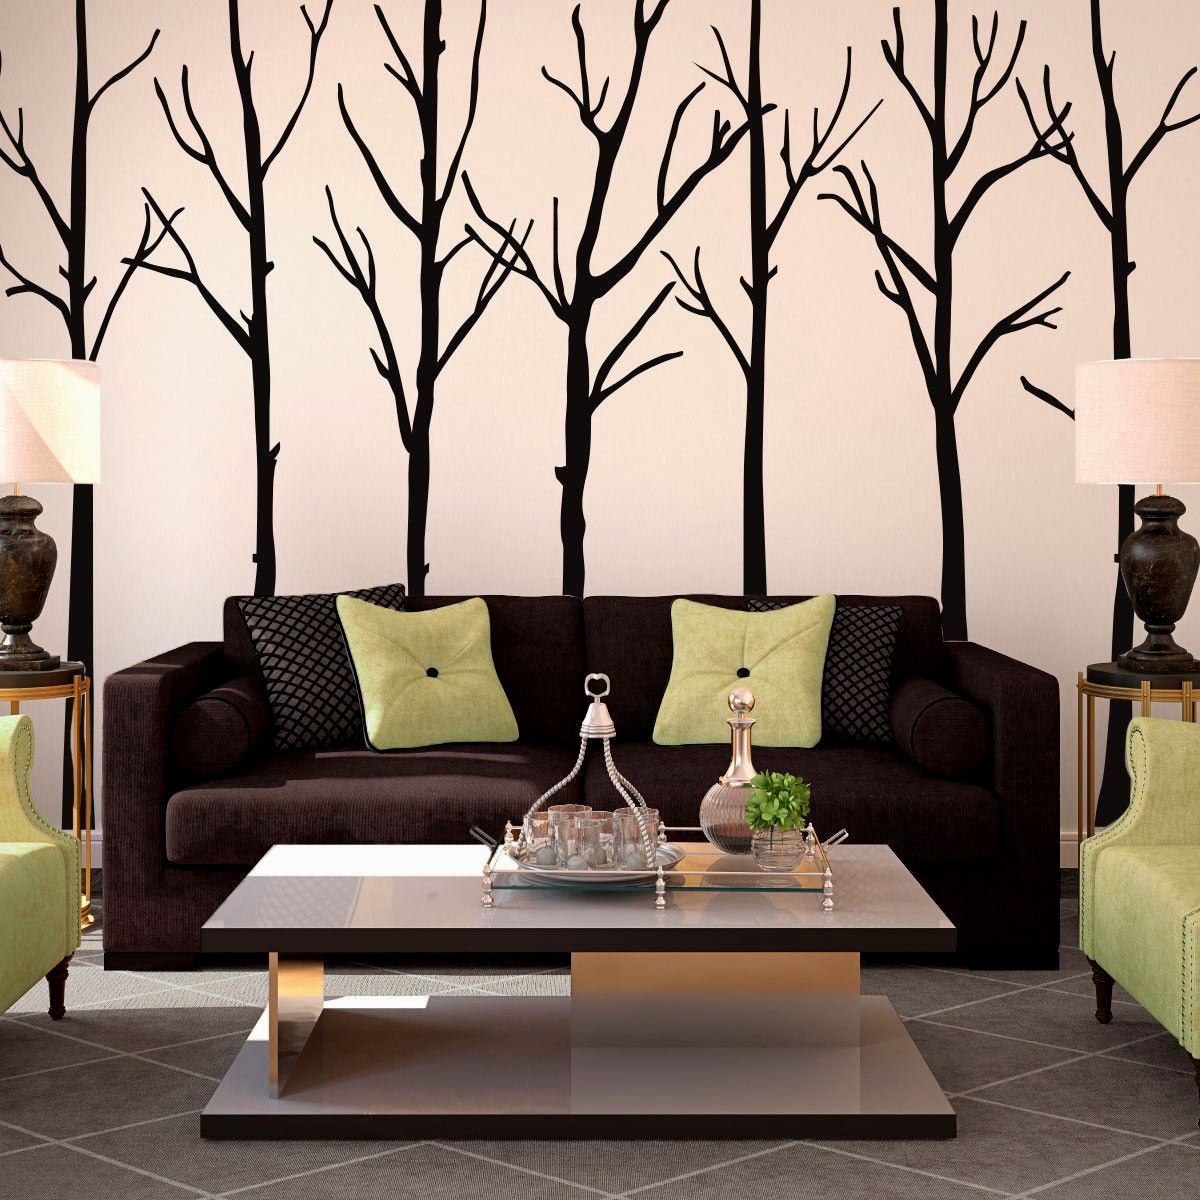 picture wall ideas for living room 09